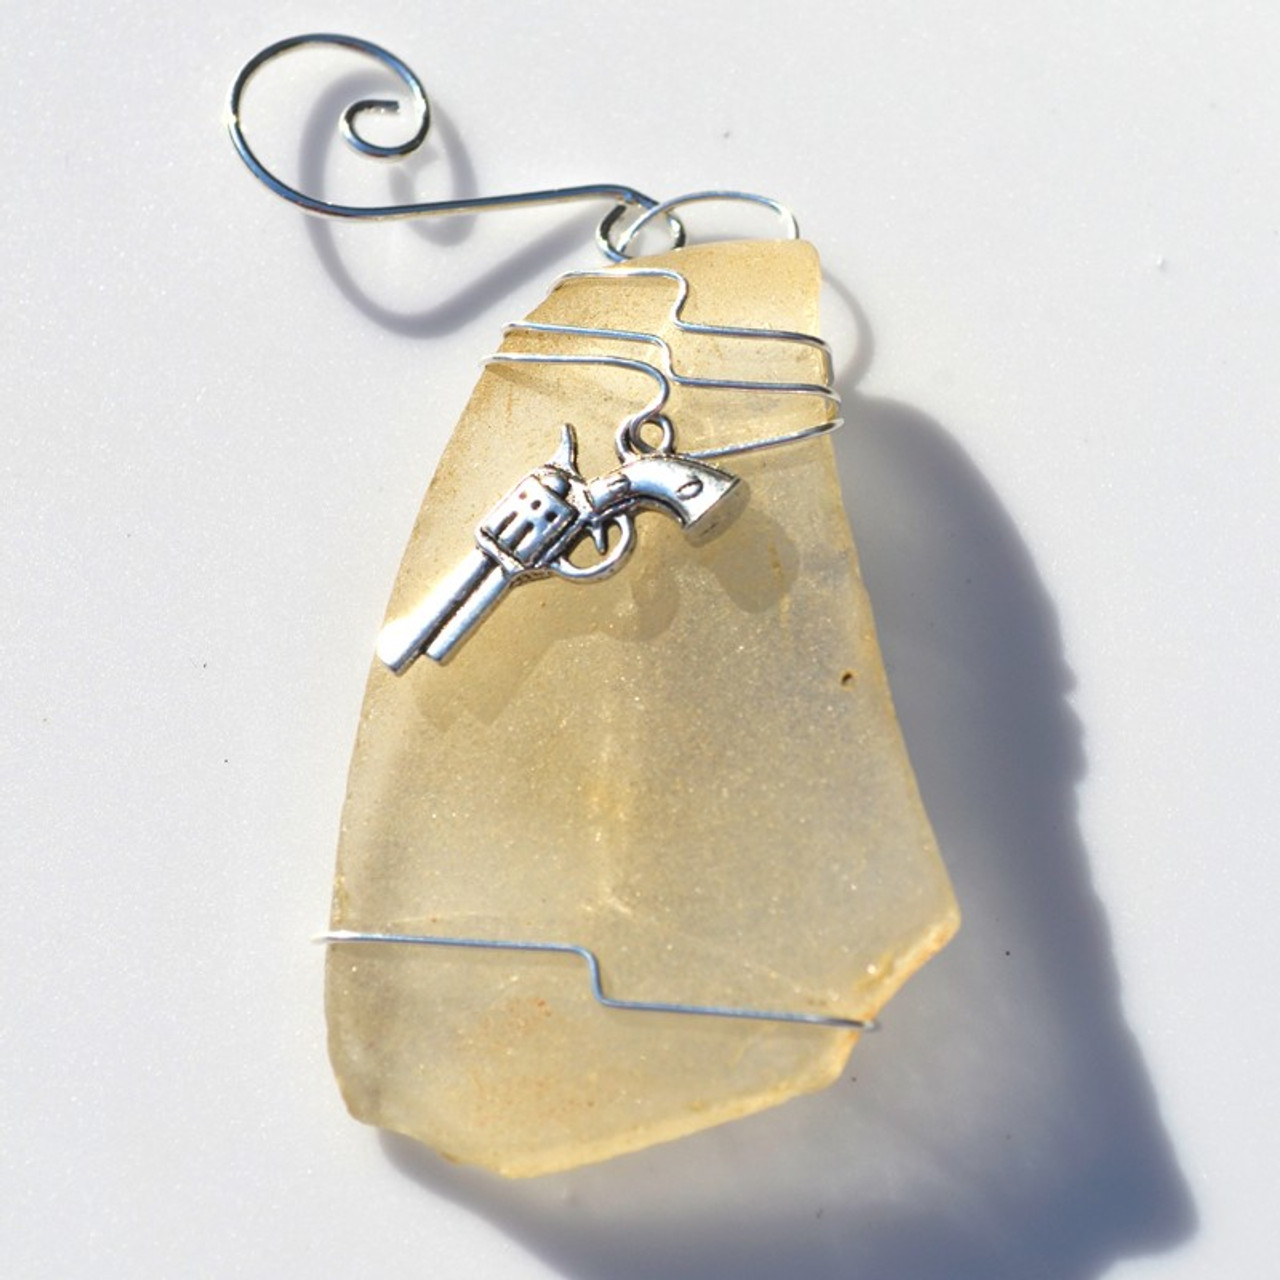 Surf Tumbled Sea Glass Ornament with a Handgun Charm - Choose Your Color Sea Glass Frosted, Green, and Brown - Made to Order